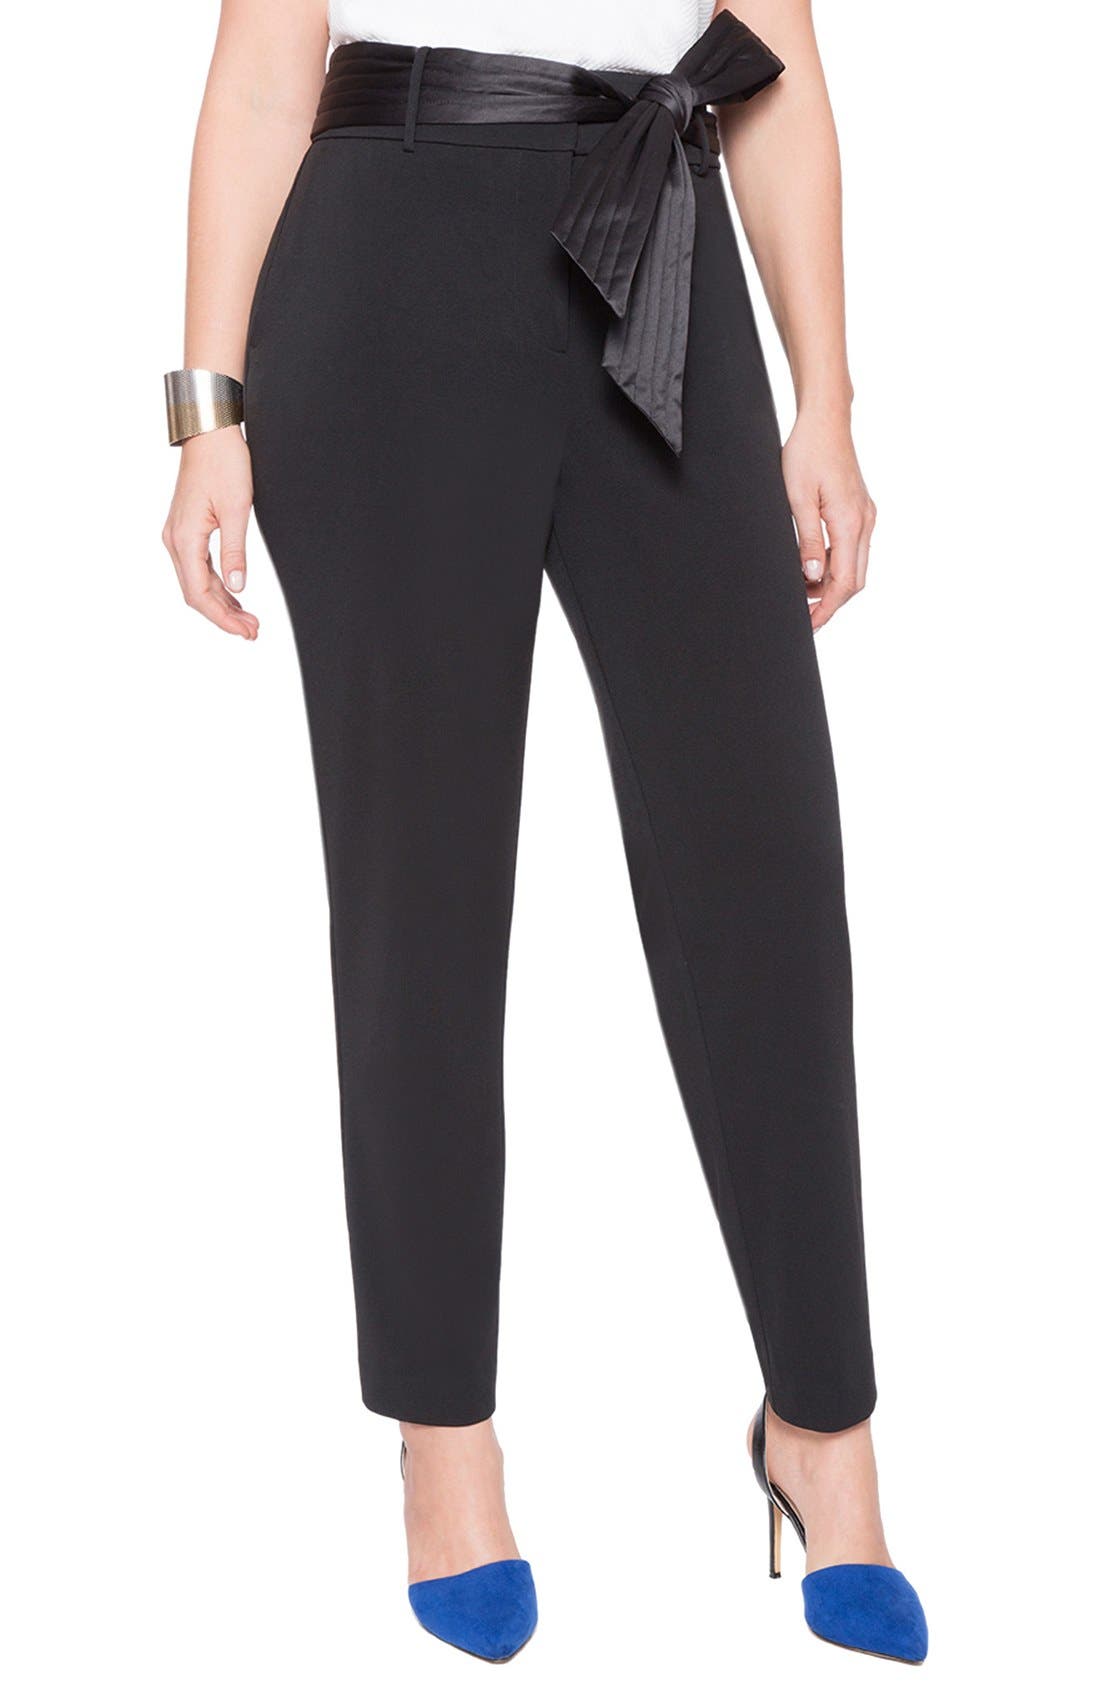 high waisted sash tie ankle pant